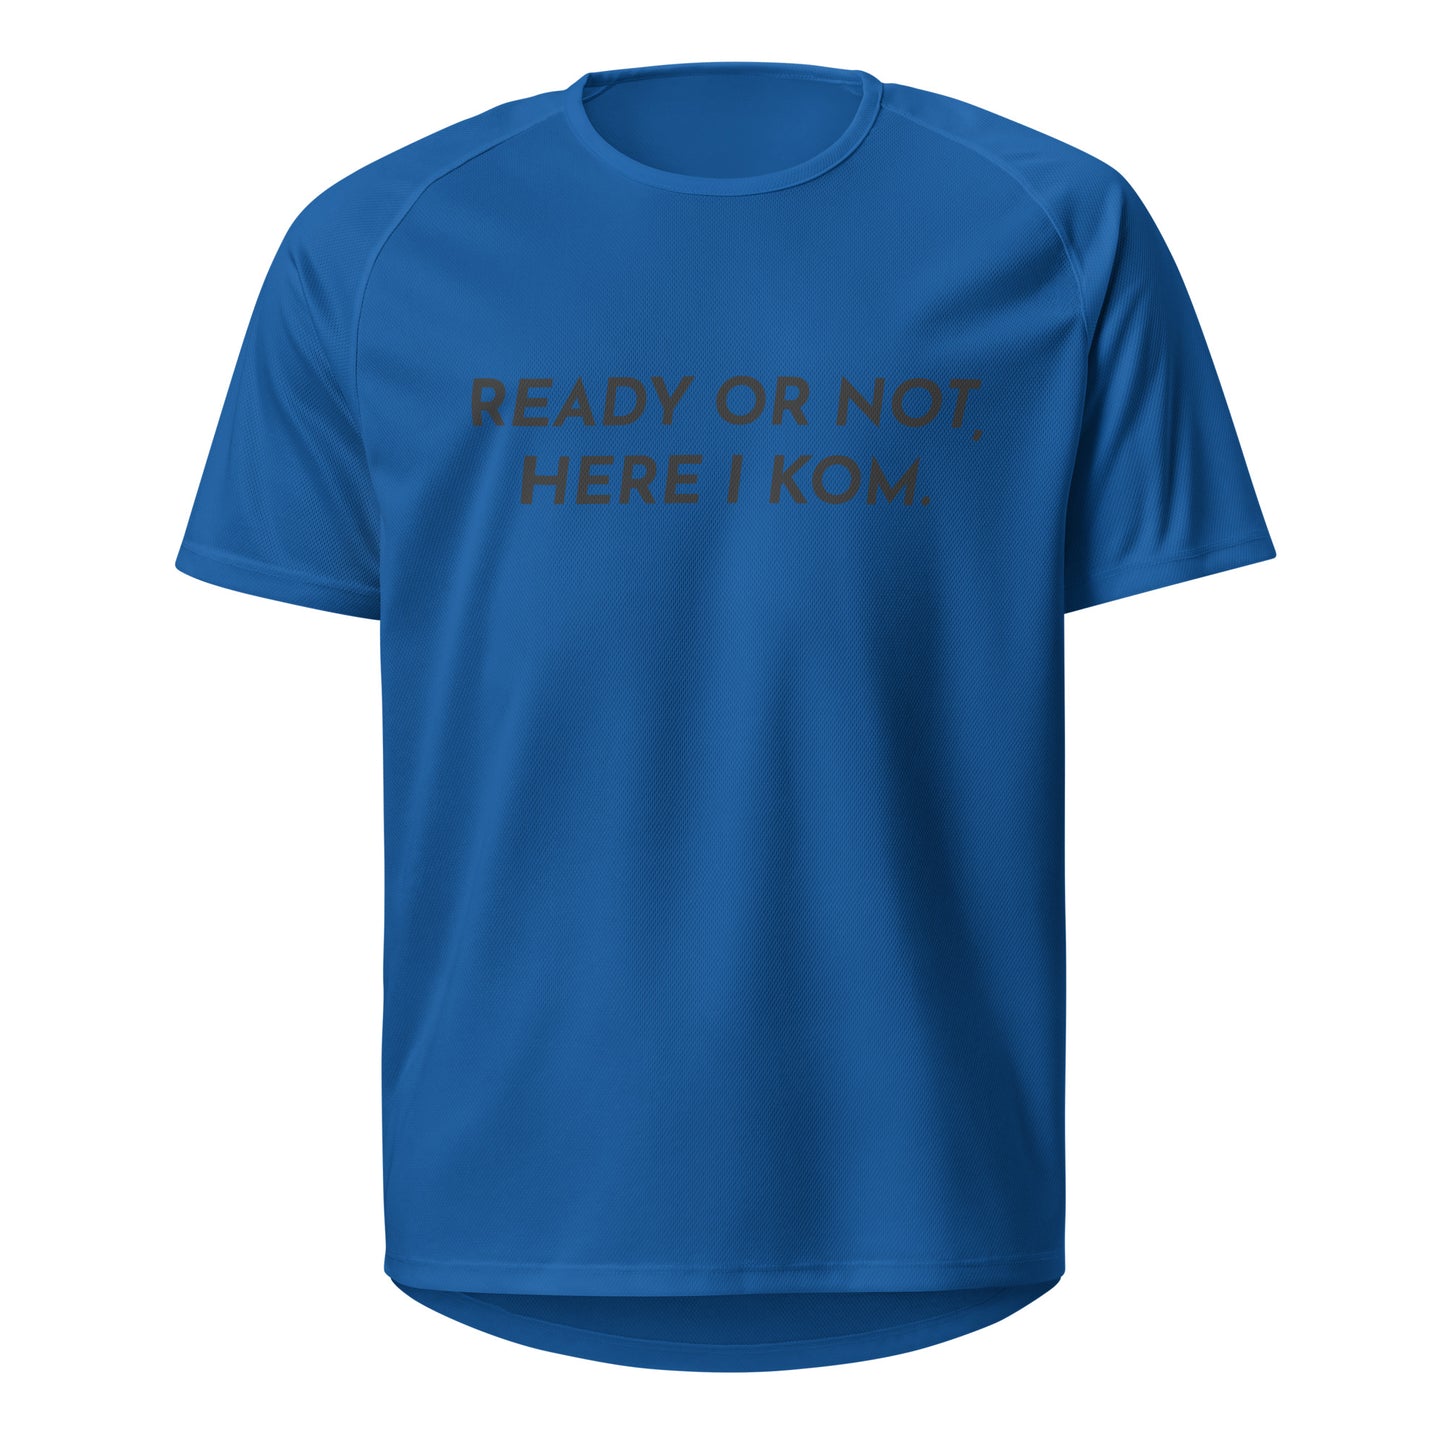 Ready Or Not, Here I KOM, Sports Jersey, Adult